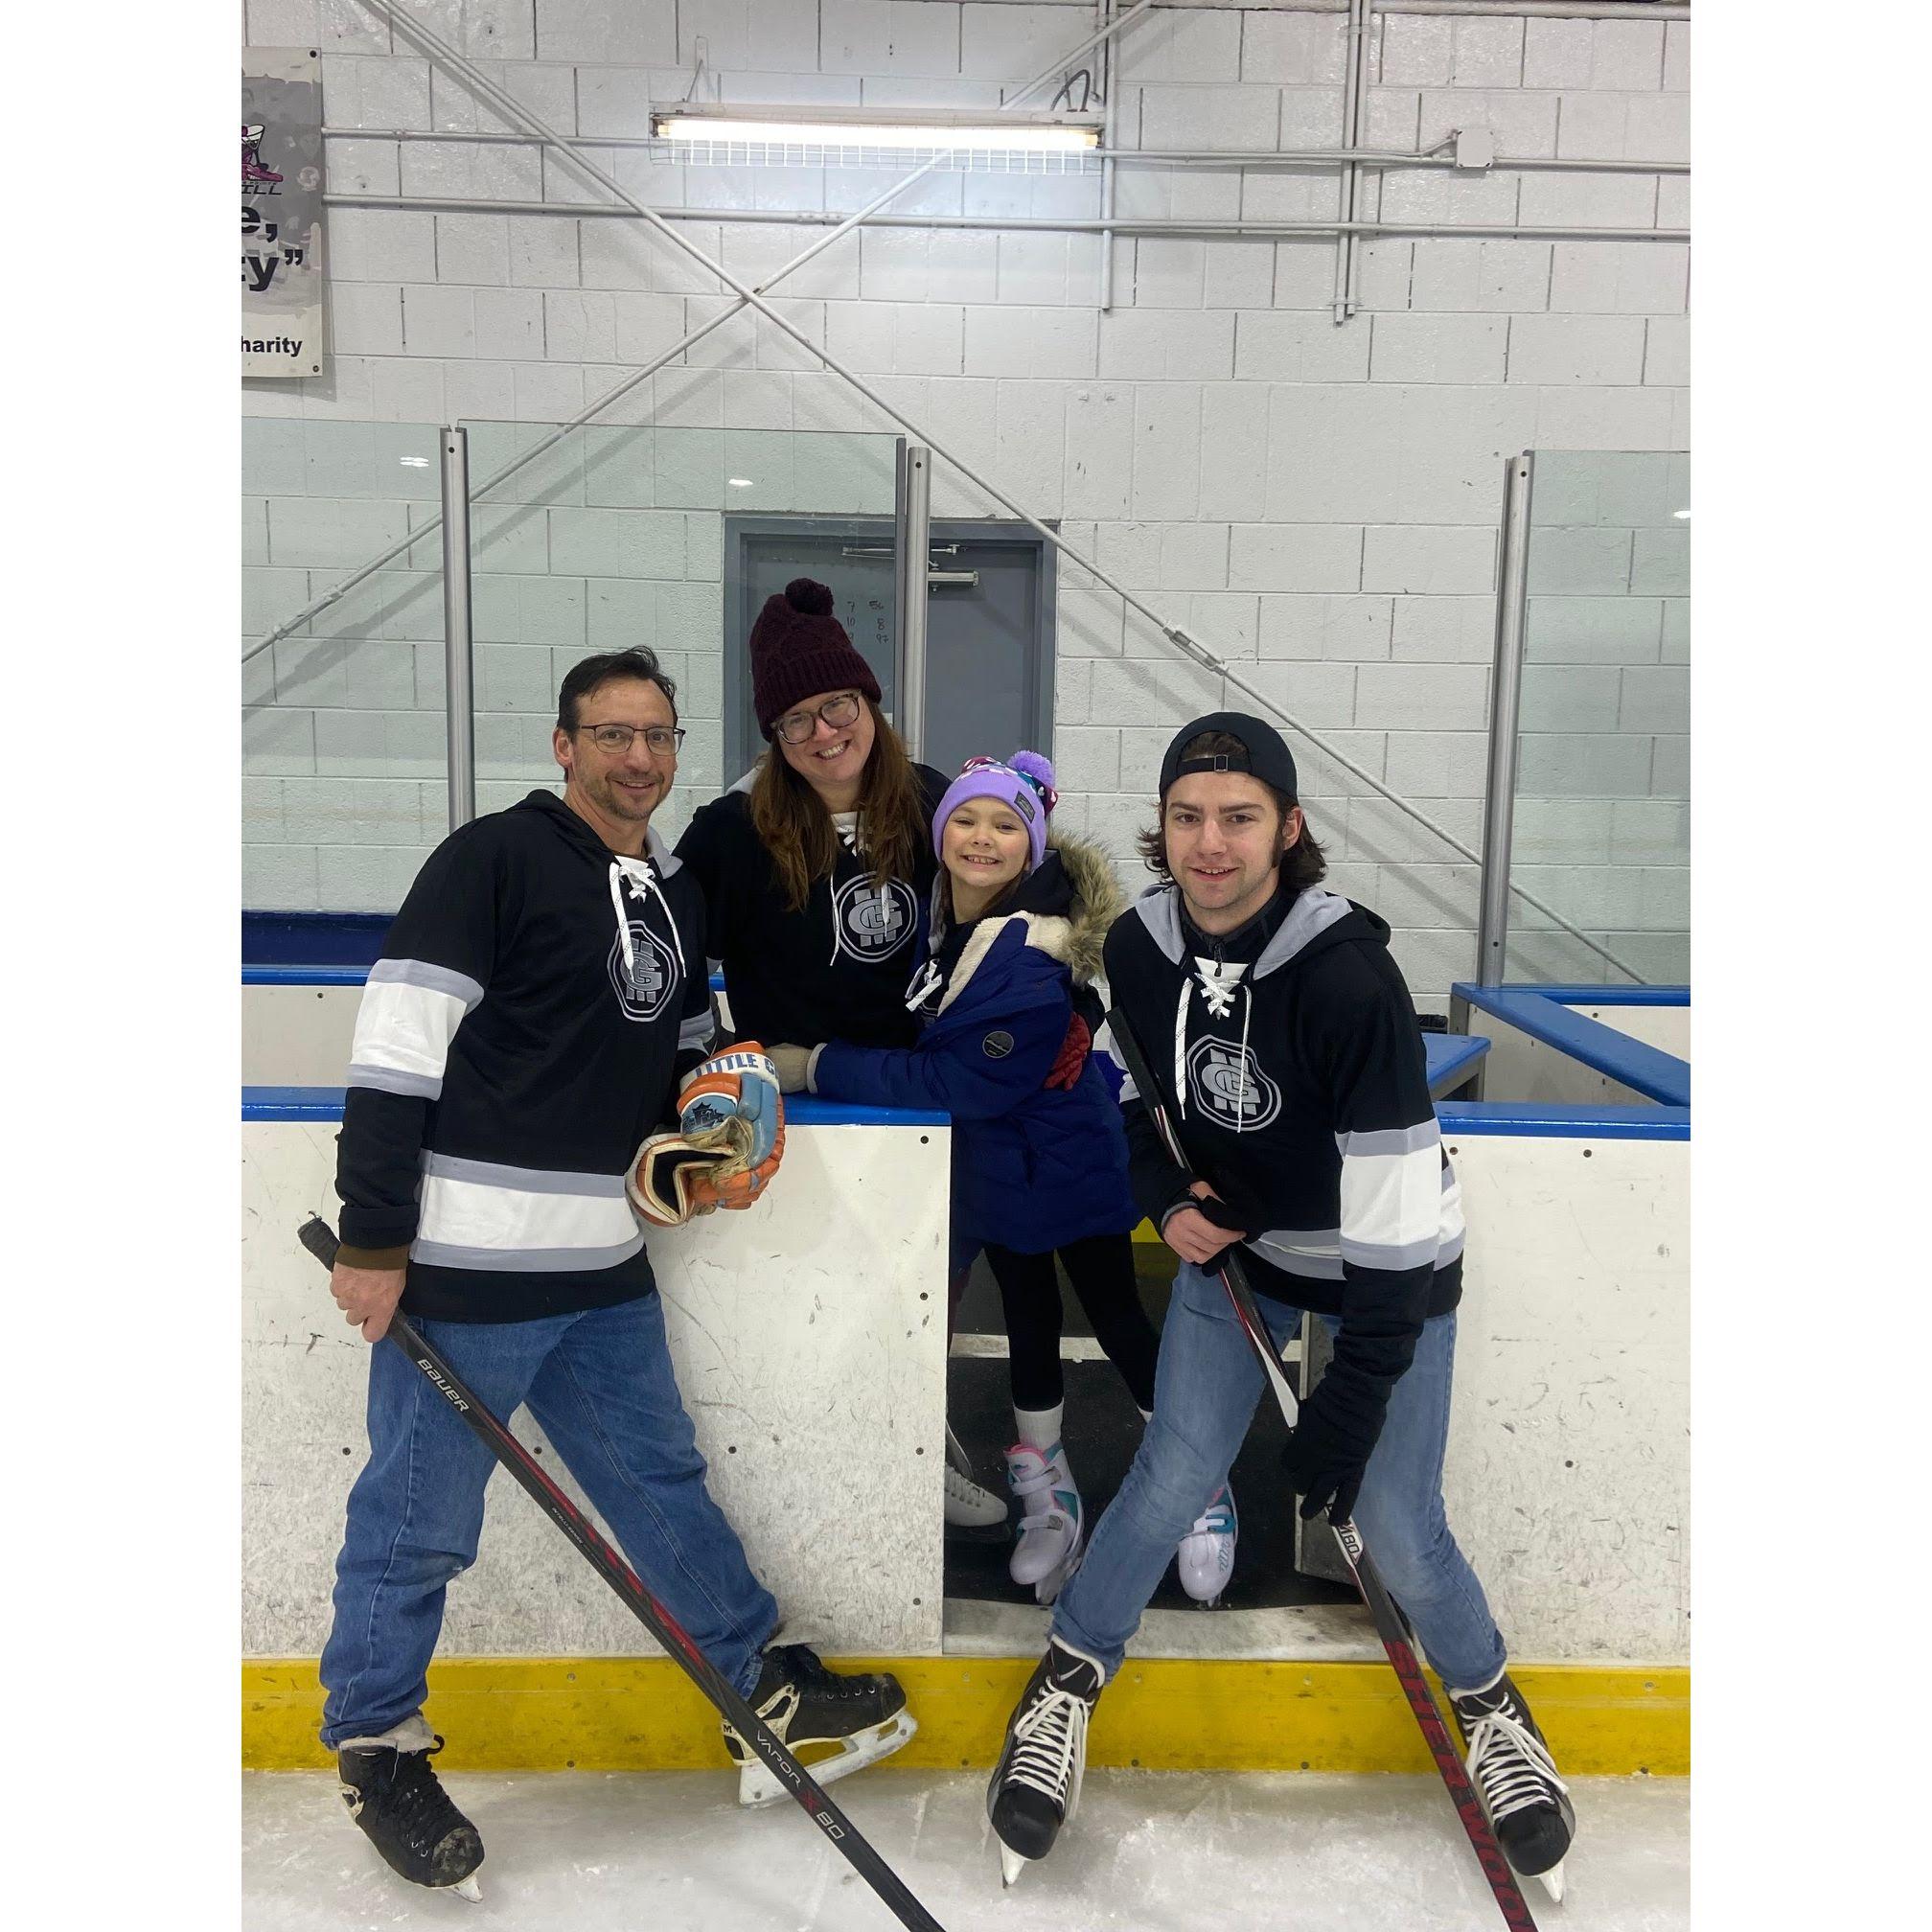 Family fun skating together and sporting our matching MG (MyDeal Graphics) hoodies